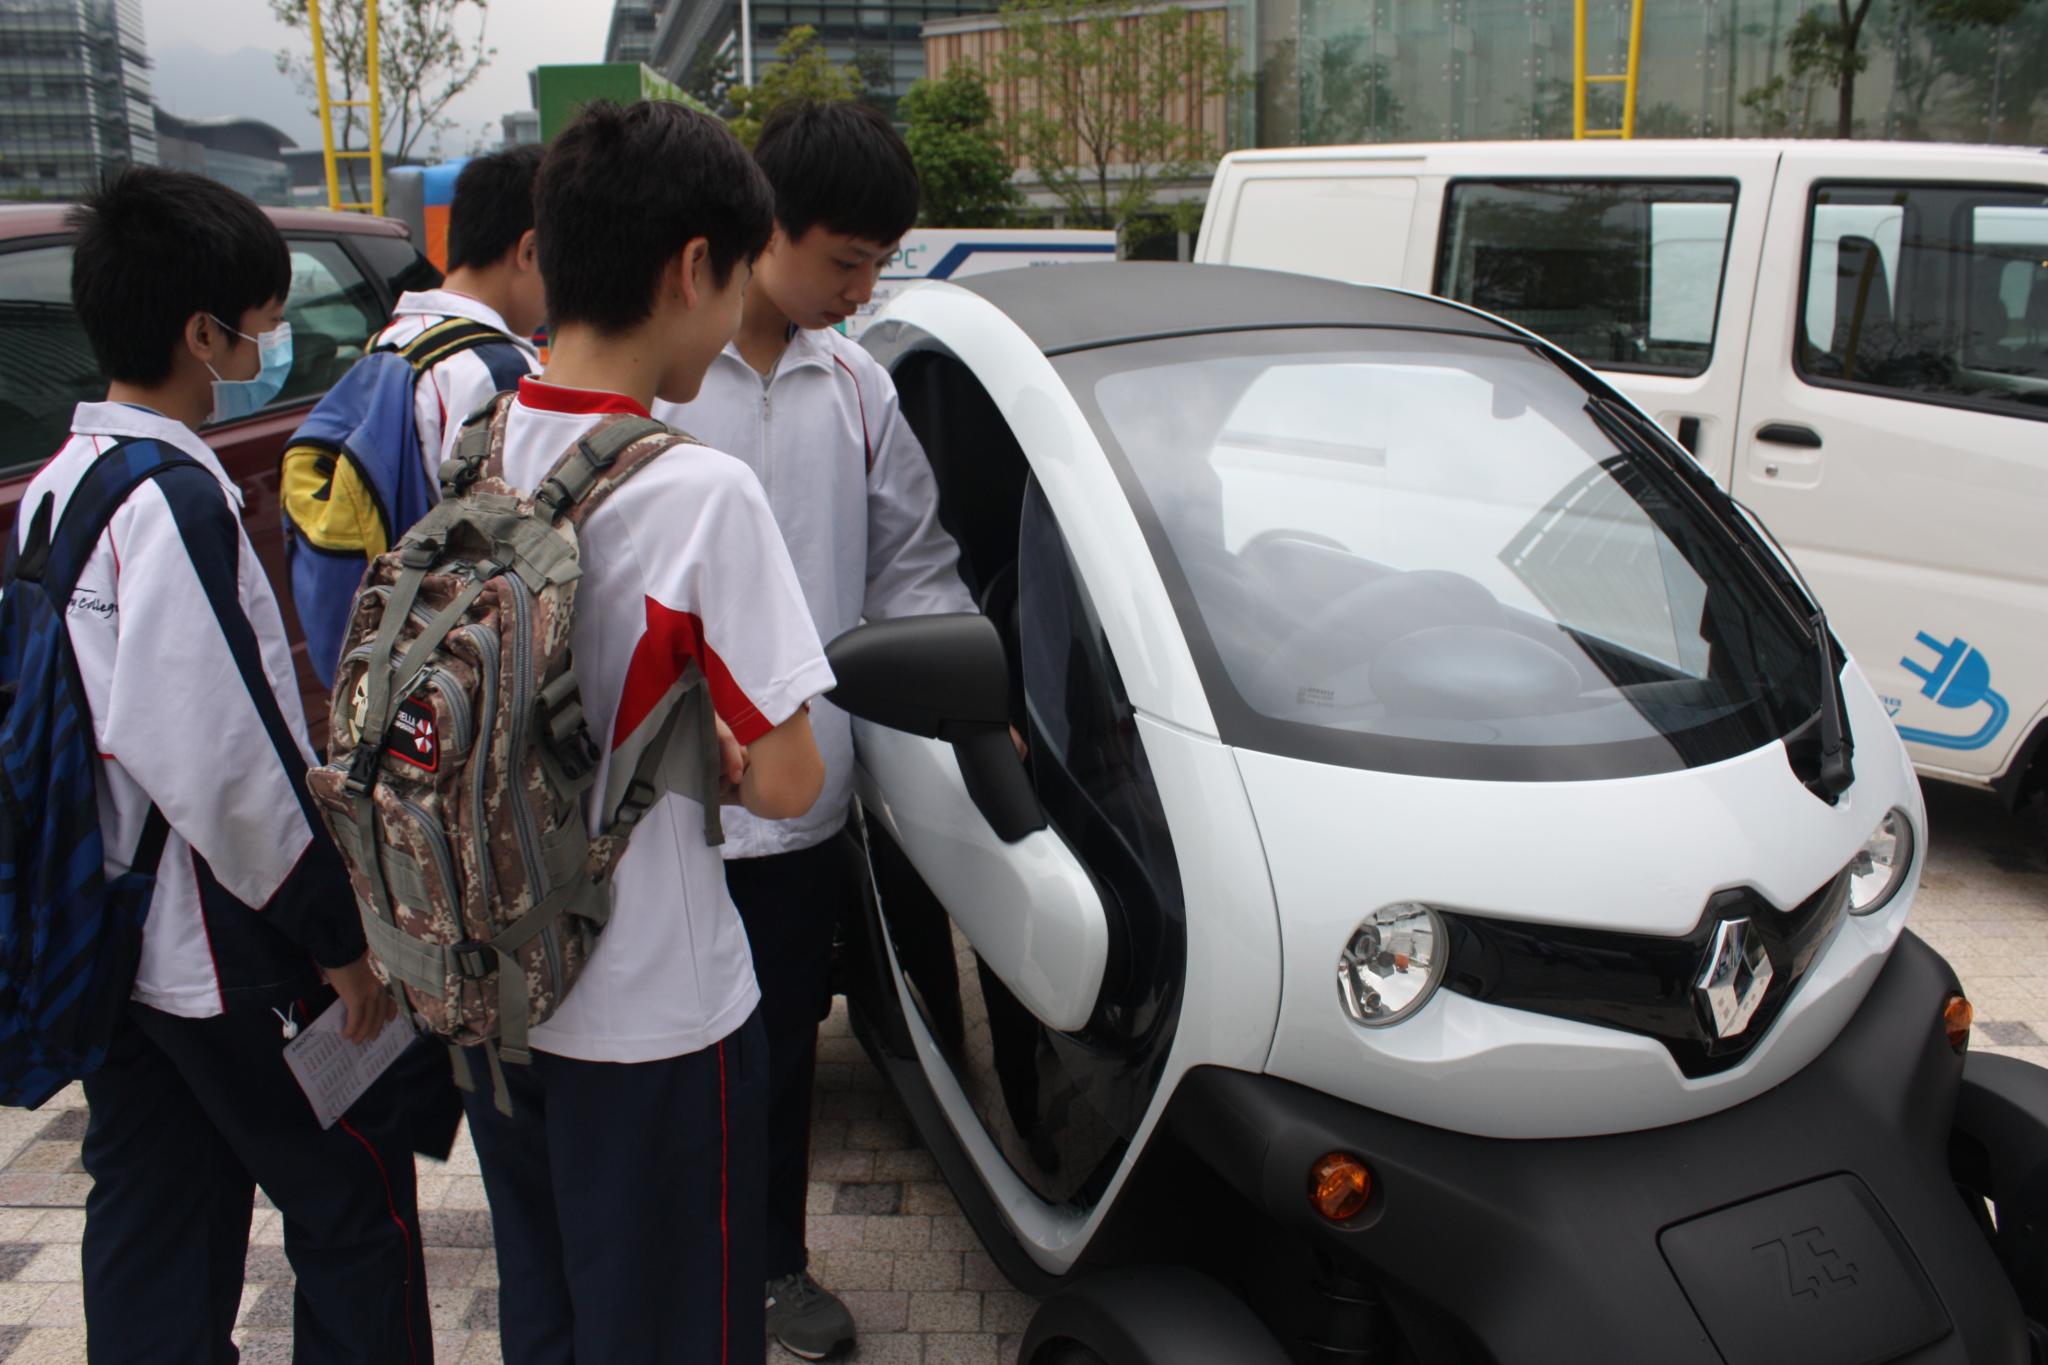 Students are showing an avid interest in the new electrical car